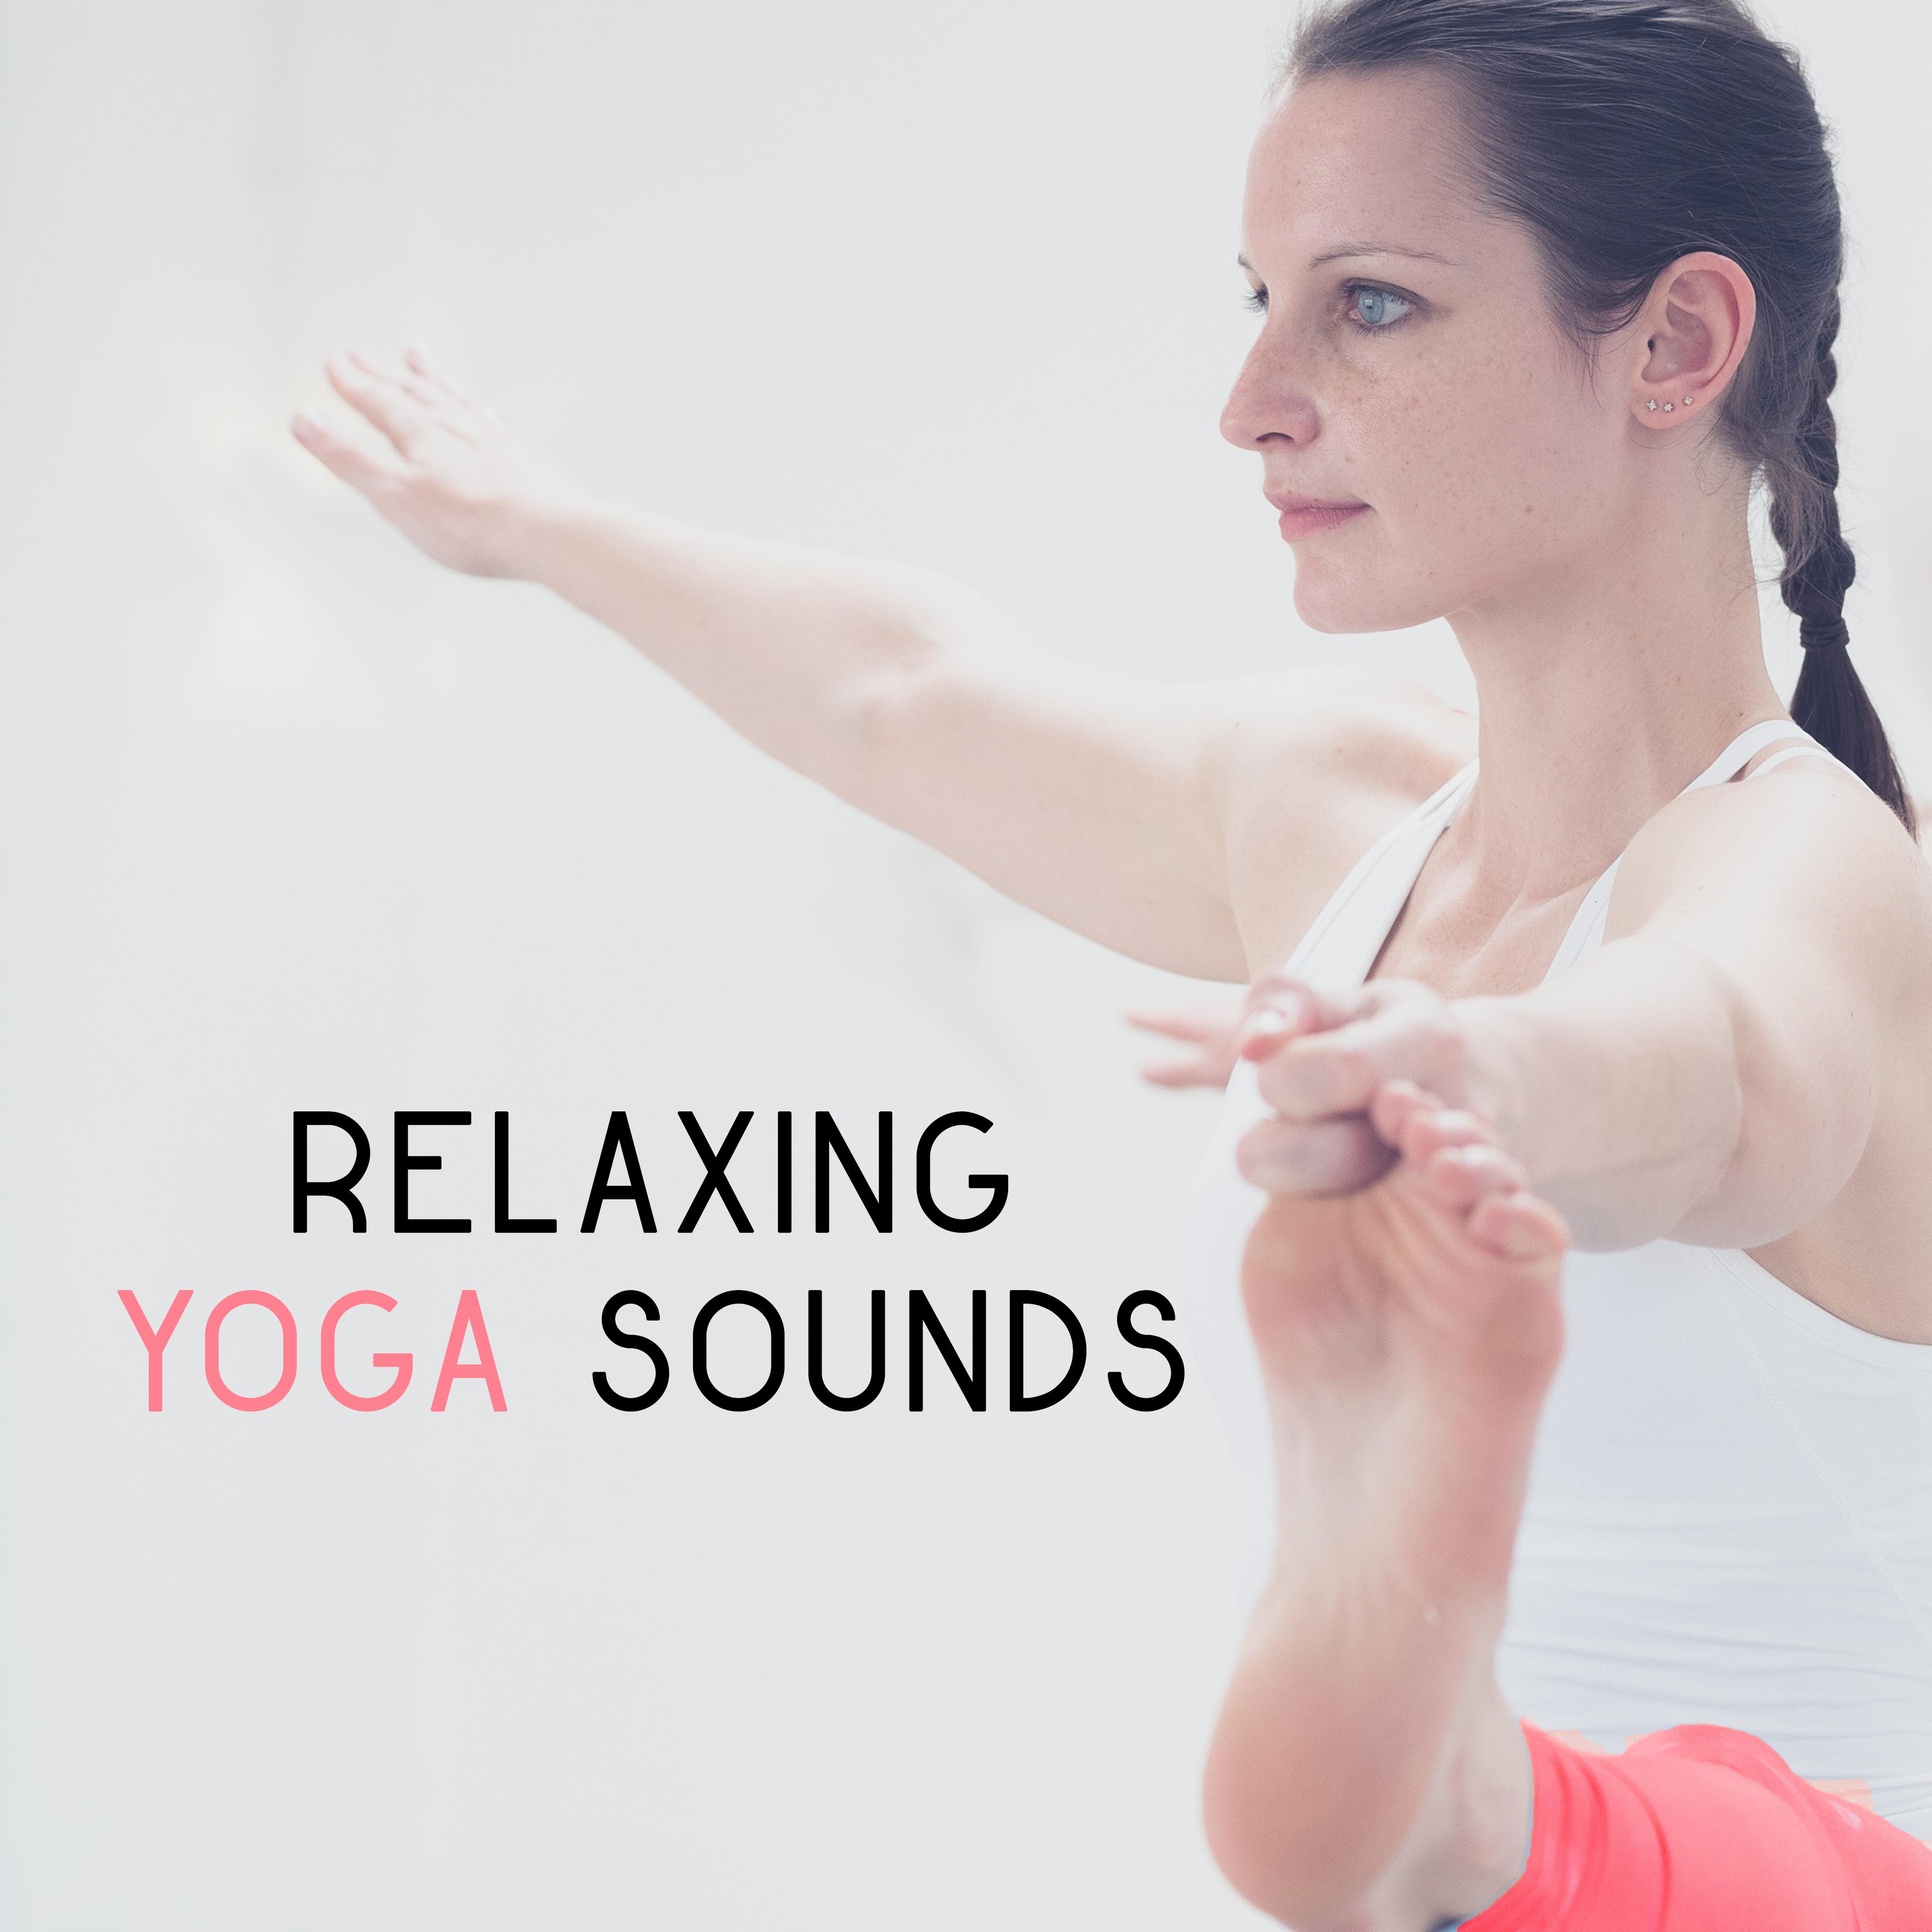 Relaxing Yoga Sounds  Soothing Sounds for Yoga Training, Meditation Music, Relax for Mind  Body, Inner Silence